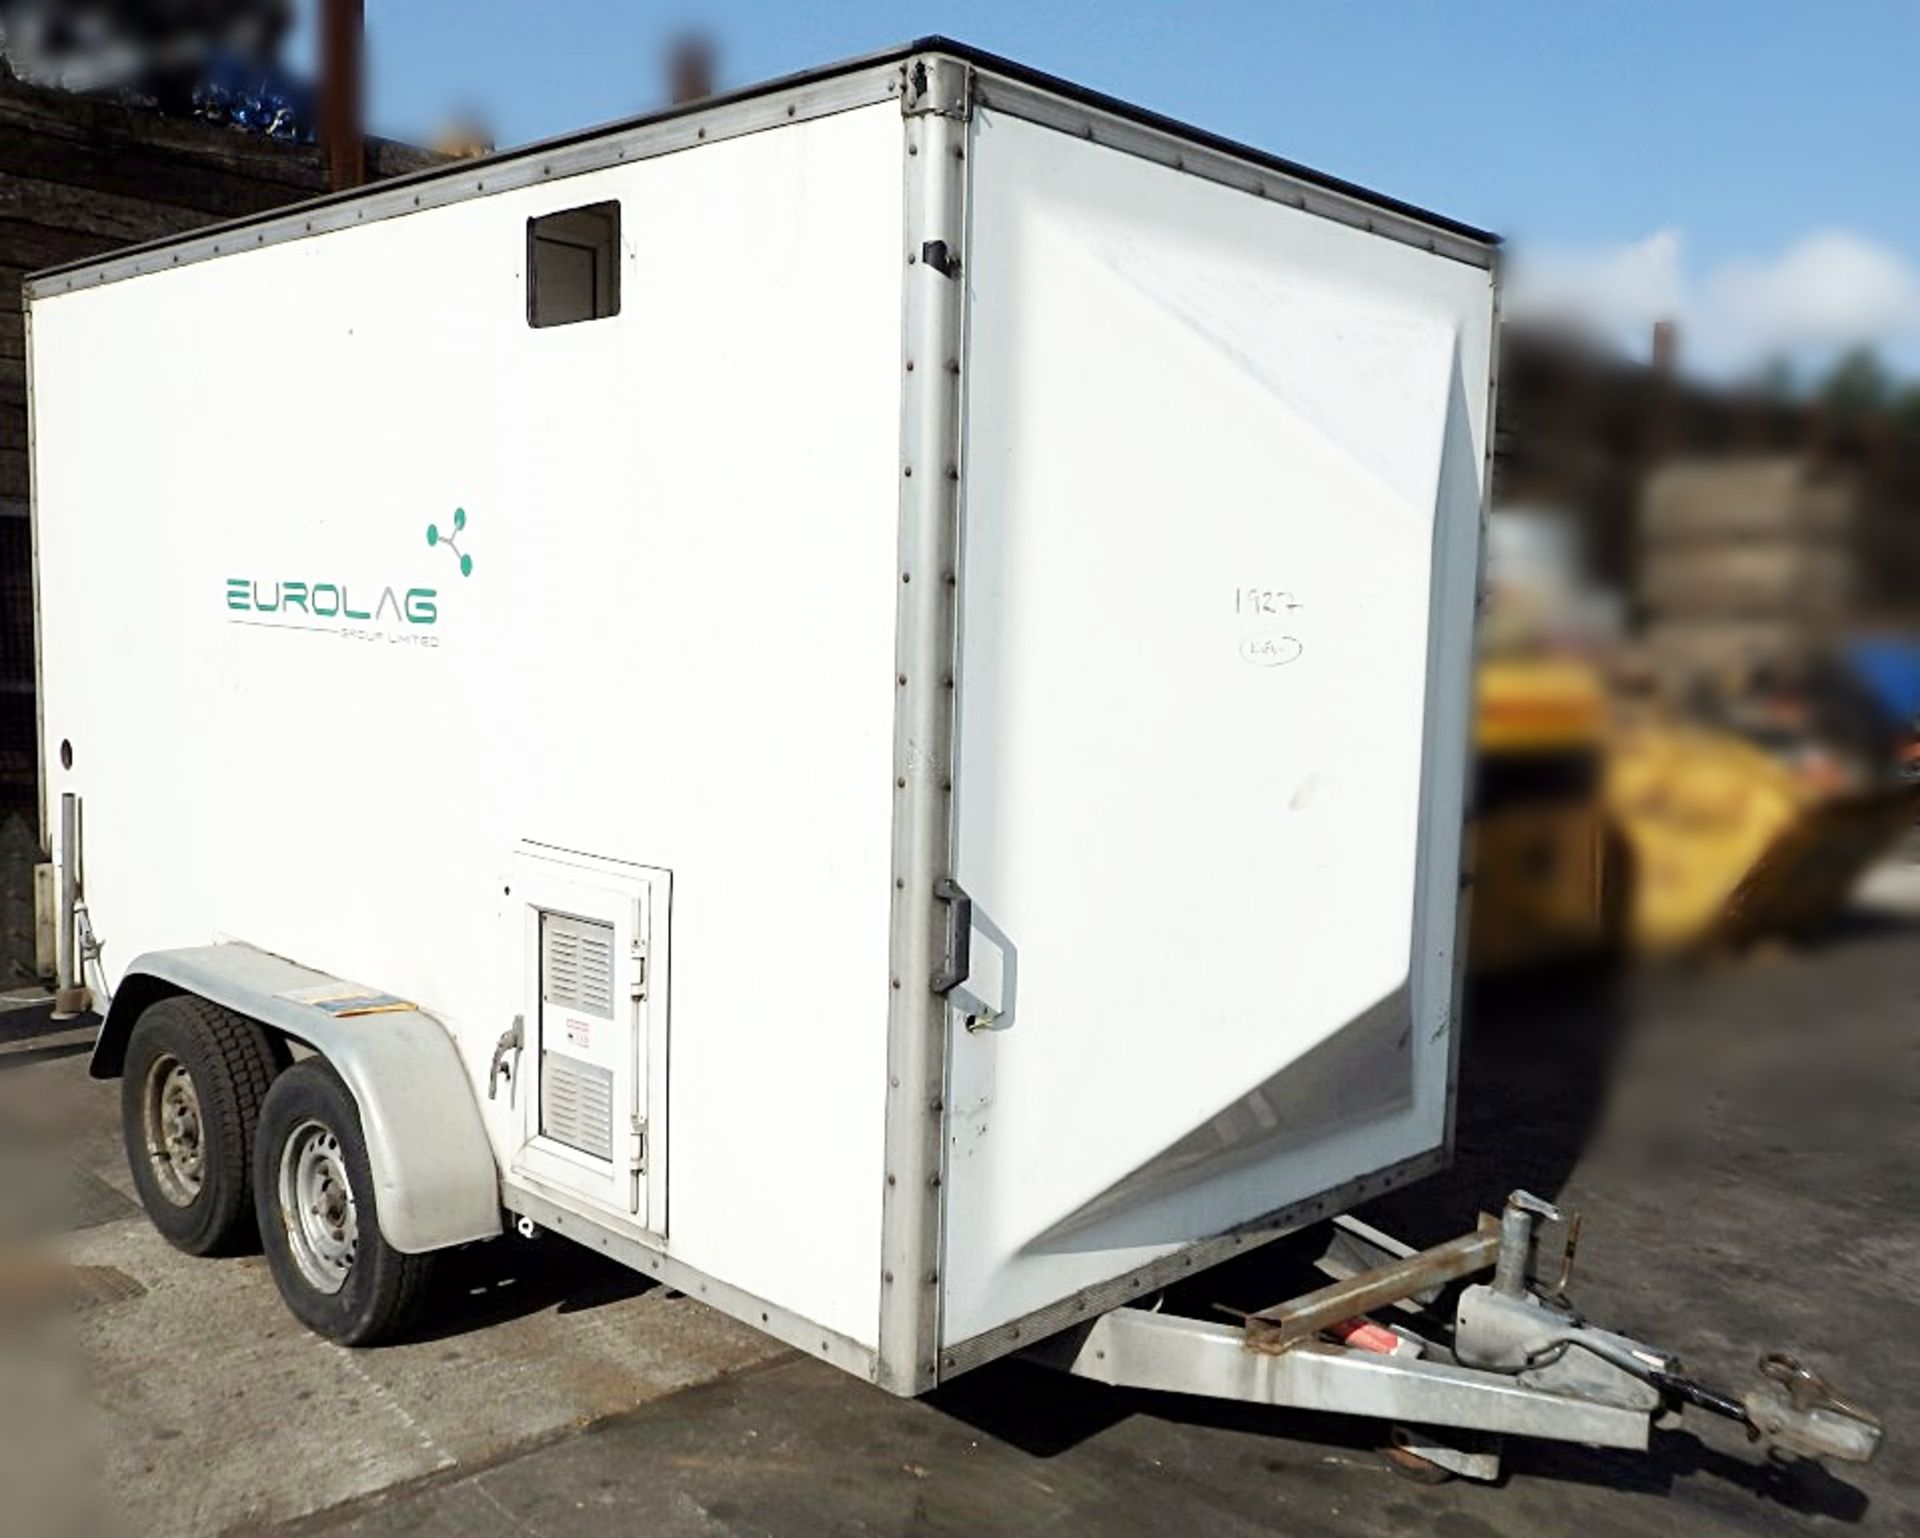 1 x Eurolag Towing Trailer With In and Out Shower Facility - Previously Used As Decontamination Wash